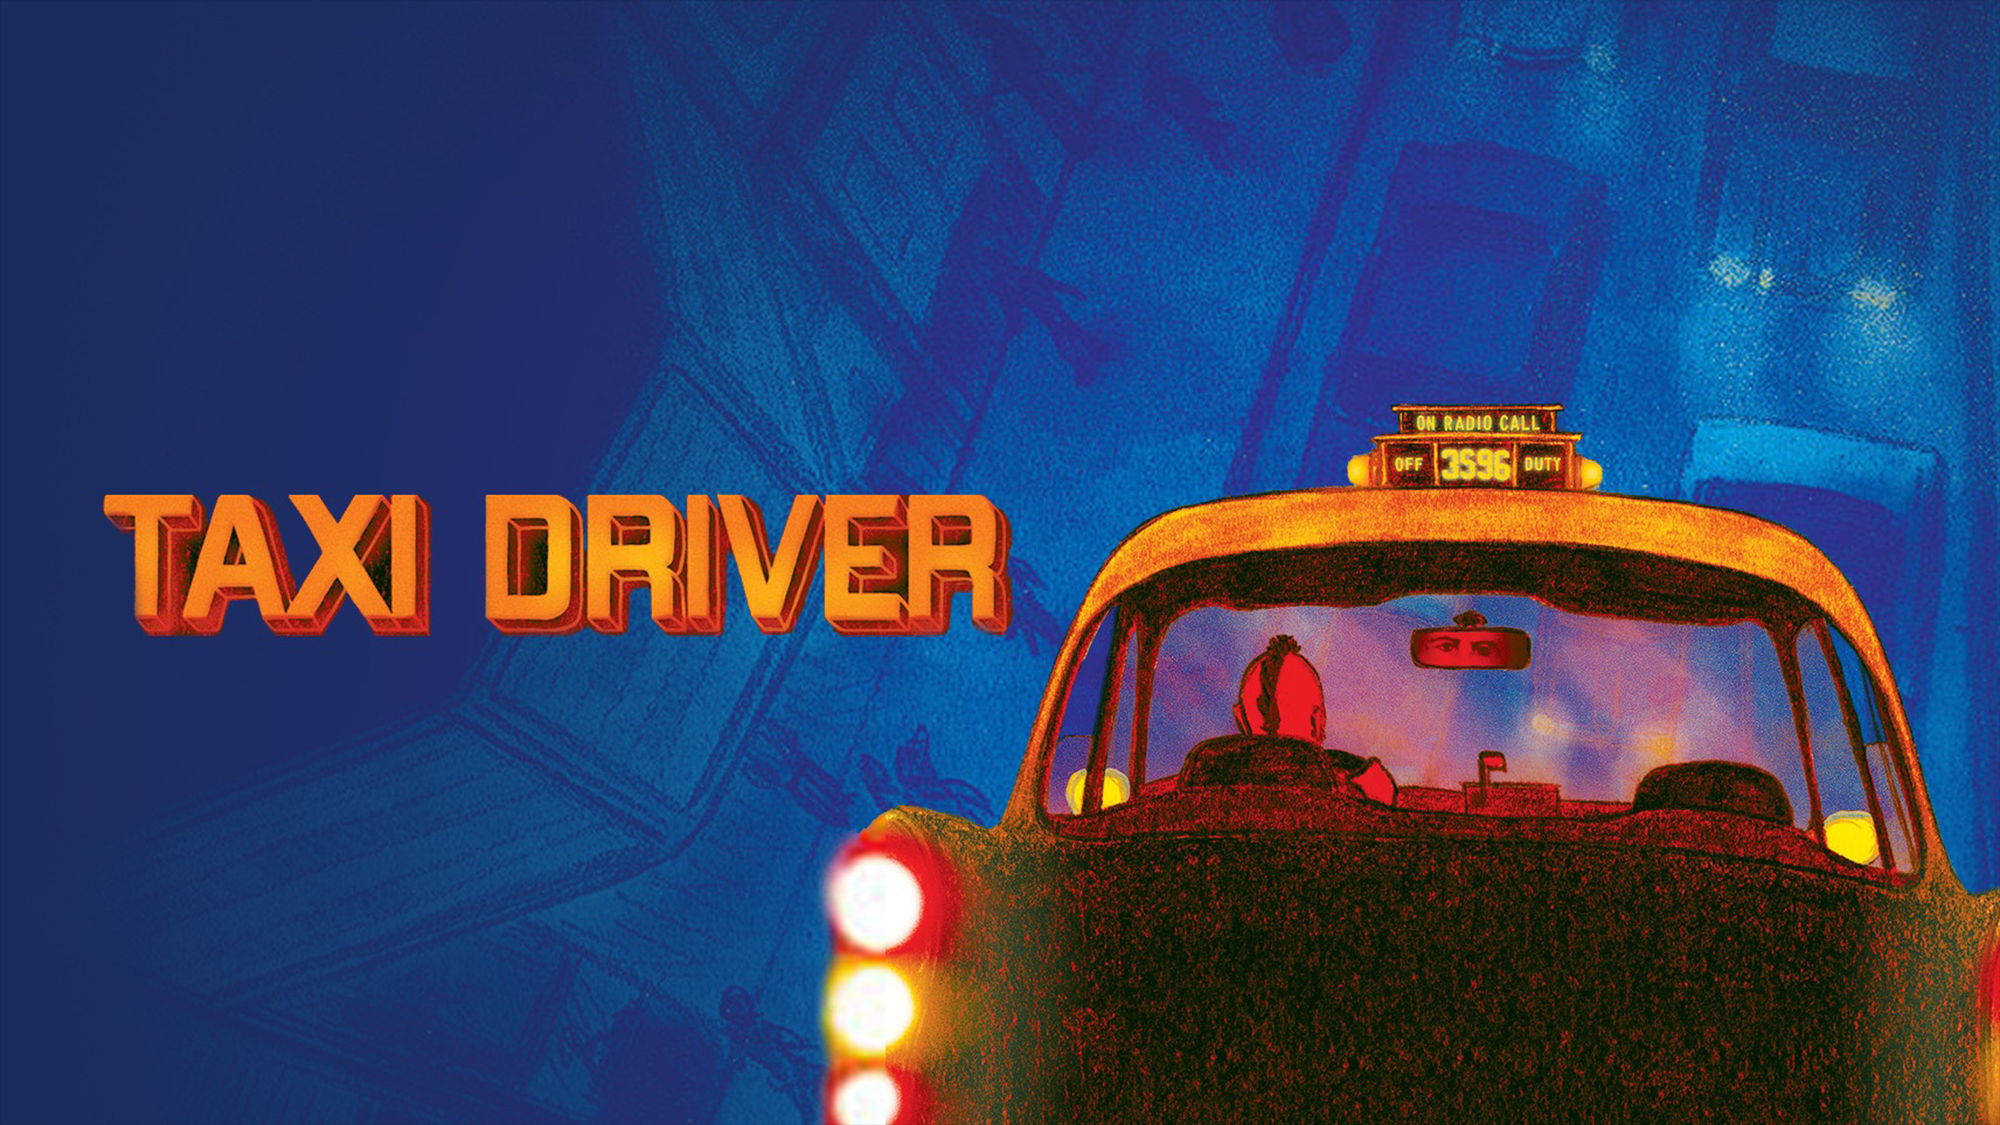 Download Iconic Scene from the Movie Taxi Driver Featuring Robert De Niro  Wallpaper  Wallpaperscom